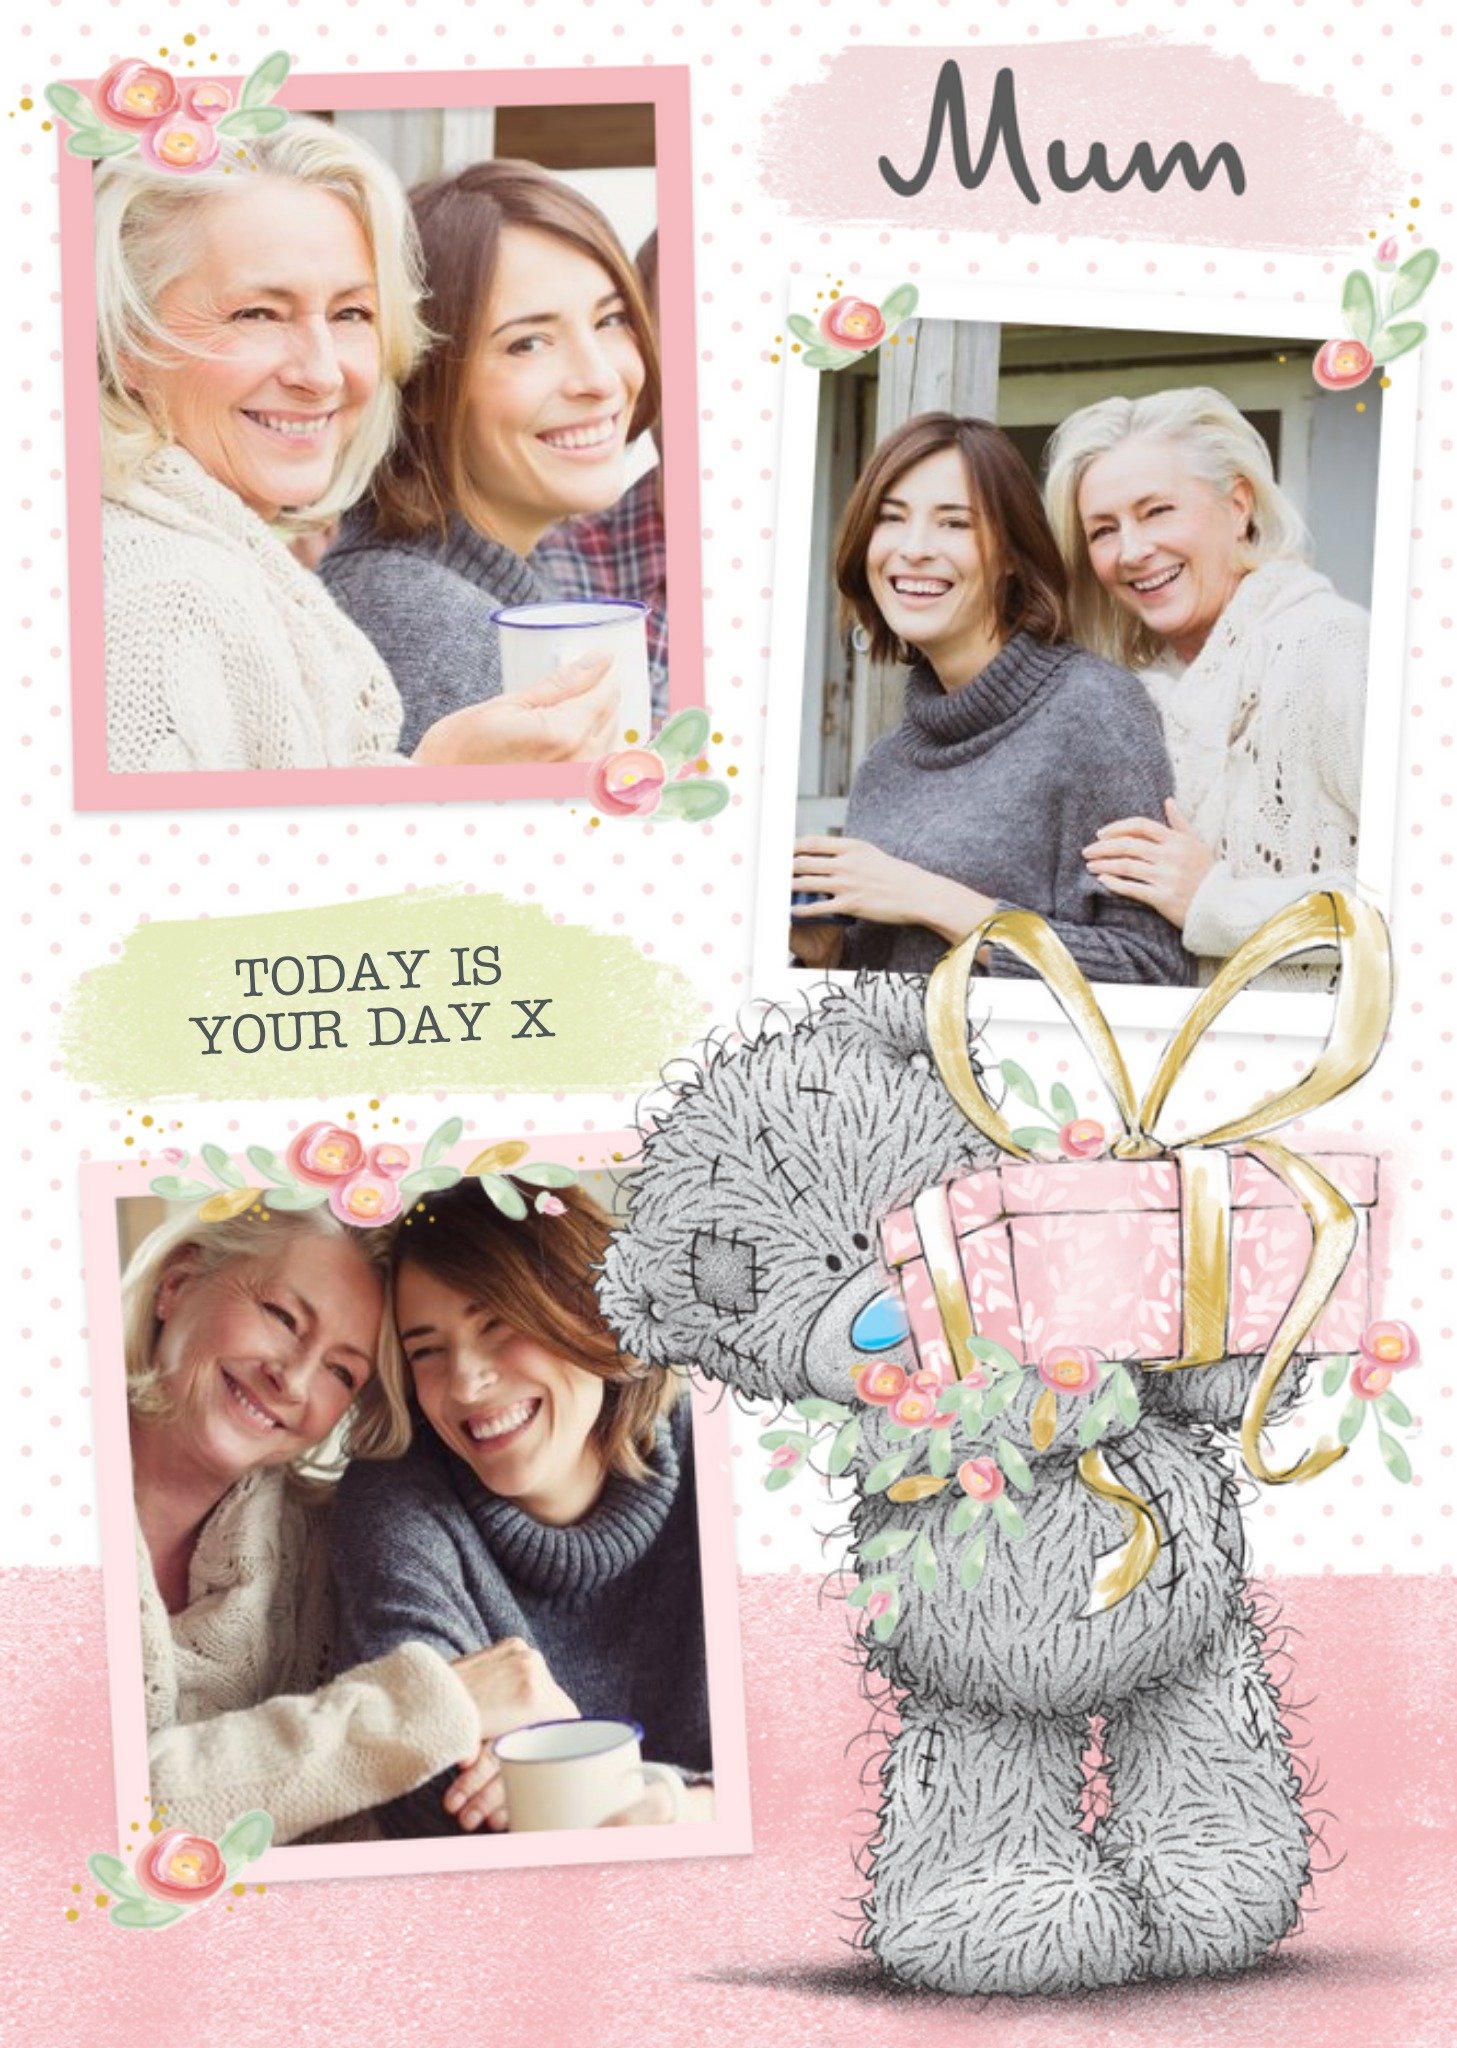 Me To You Mother's Day Card - Mum - Tatty Teddy - Photo Upload Card Ecard